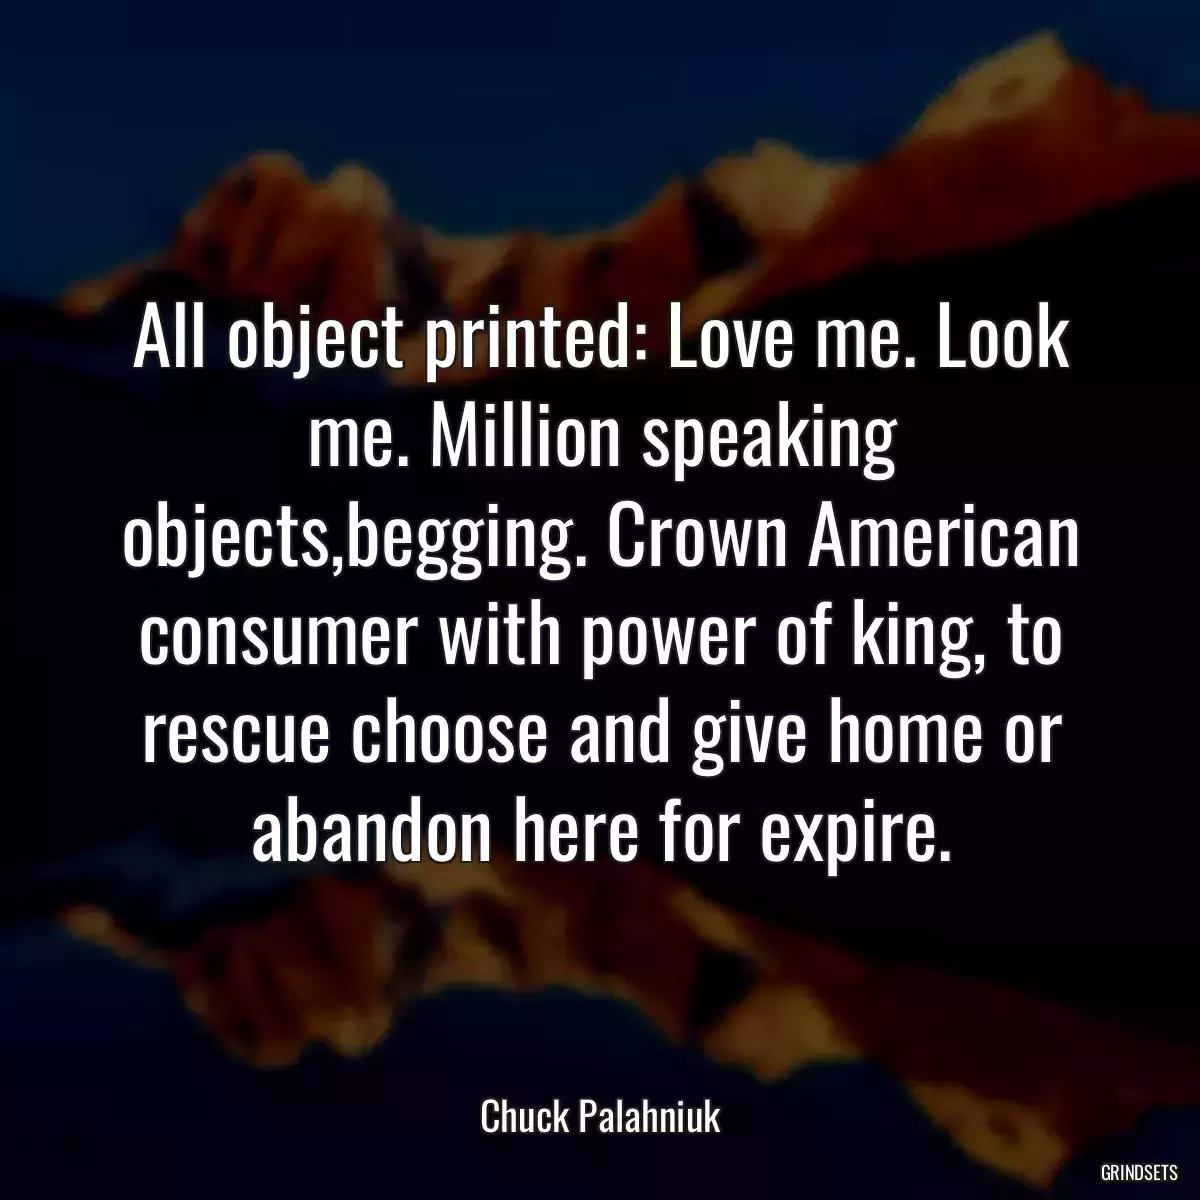 All object printed: Love me. Look me. Million speaking objects,begging. Crown American consumer with power of king, to rescue choose and give home or abandon here for expire.